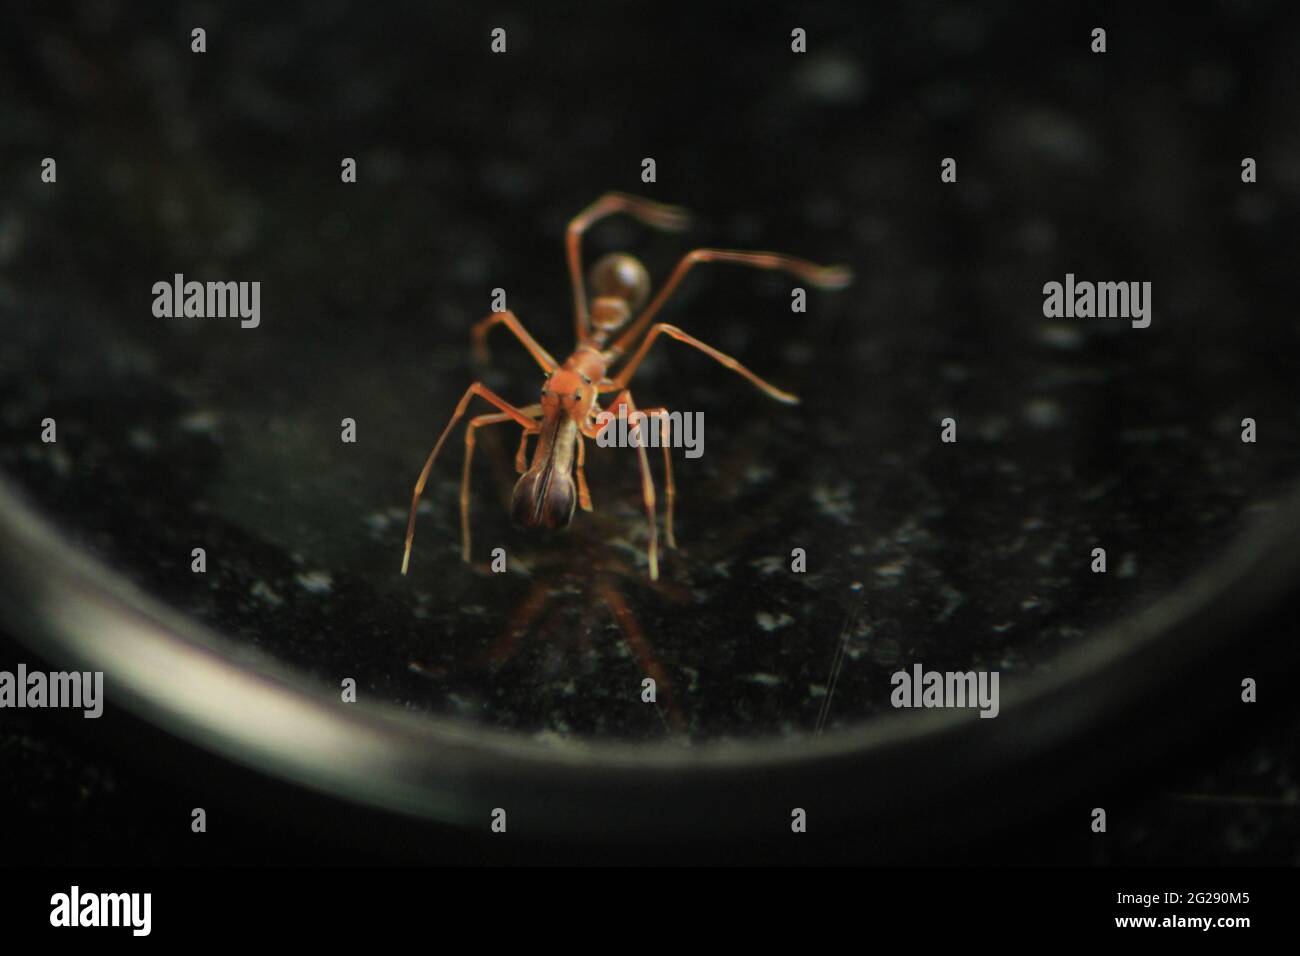 Spider Ant - Insects - Spider evolved into ant like forms in order to cohabitate in an ant colony and feed on other ants. Spider in Disguise. Stock Photo